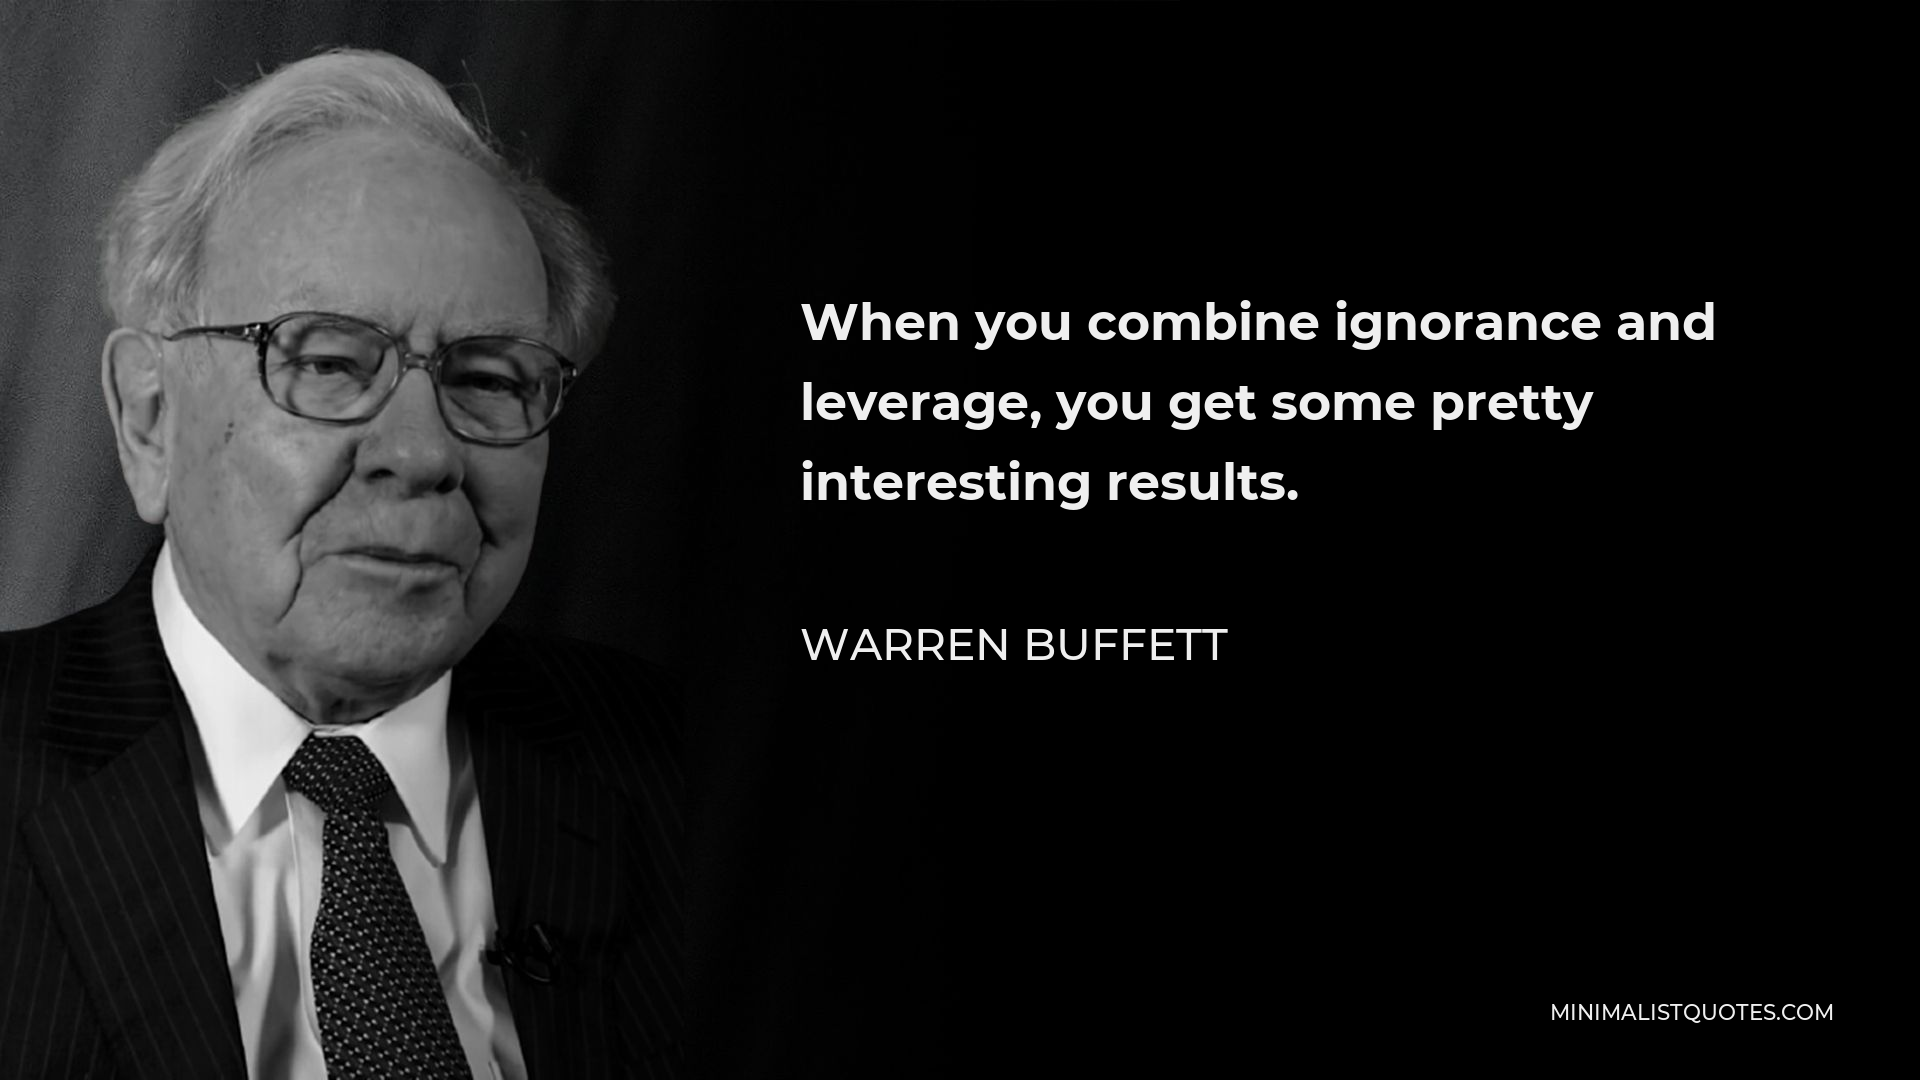 Warren Buffett Quote - When you combine ignorance and leverage, you get some pretty interesting results.